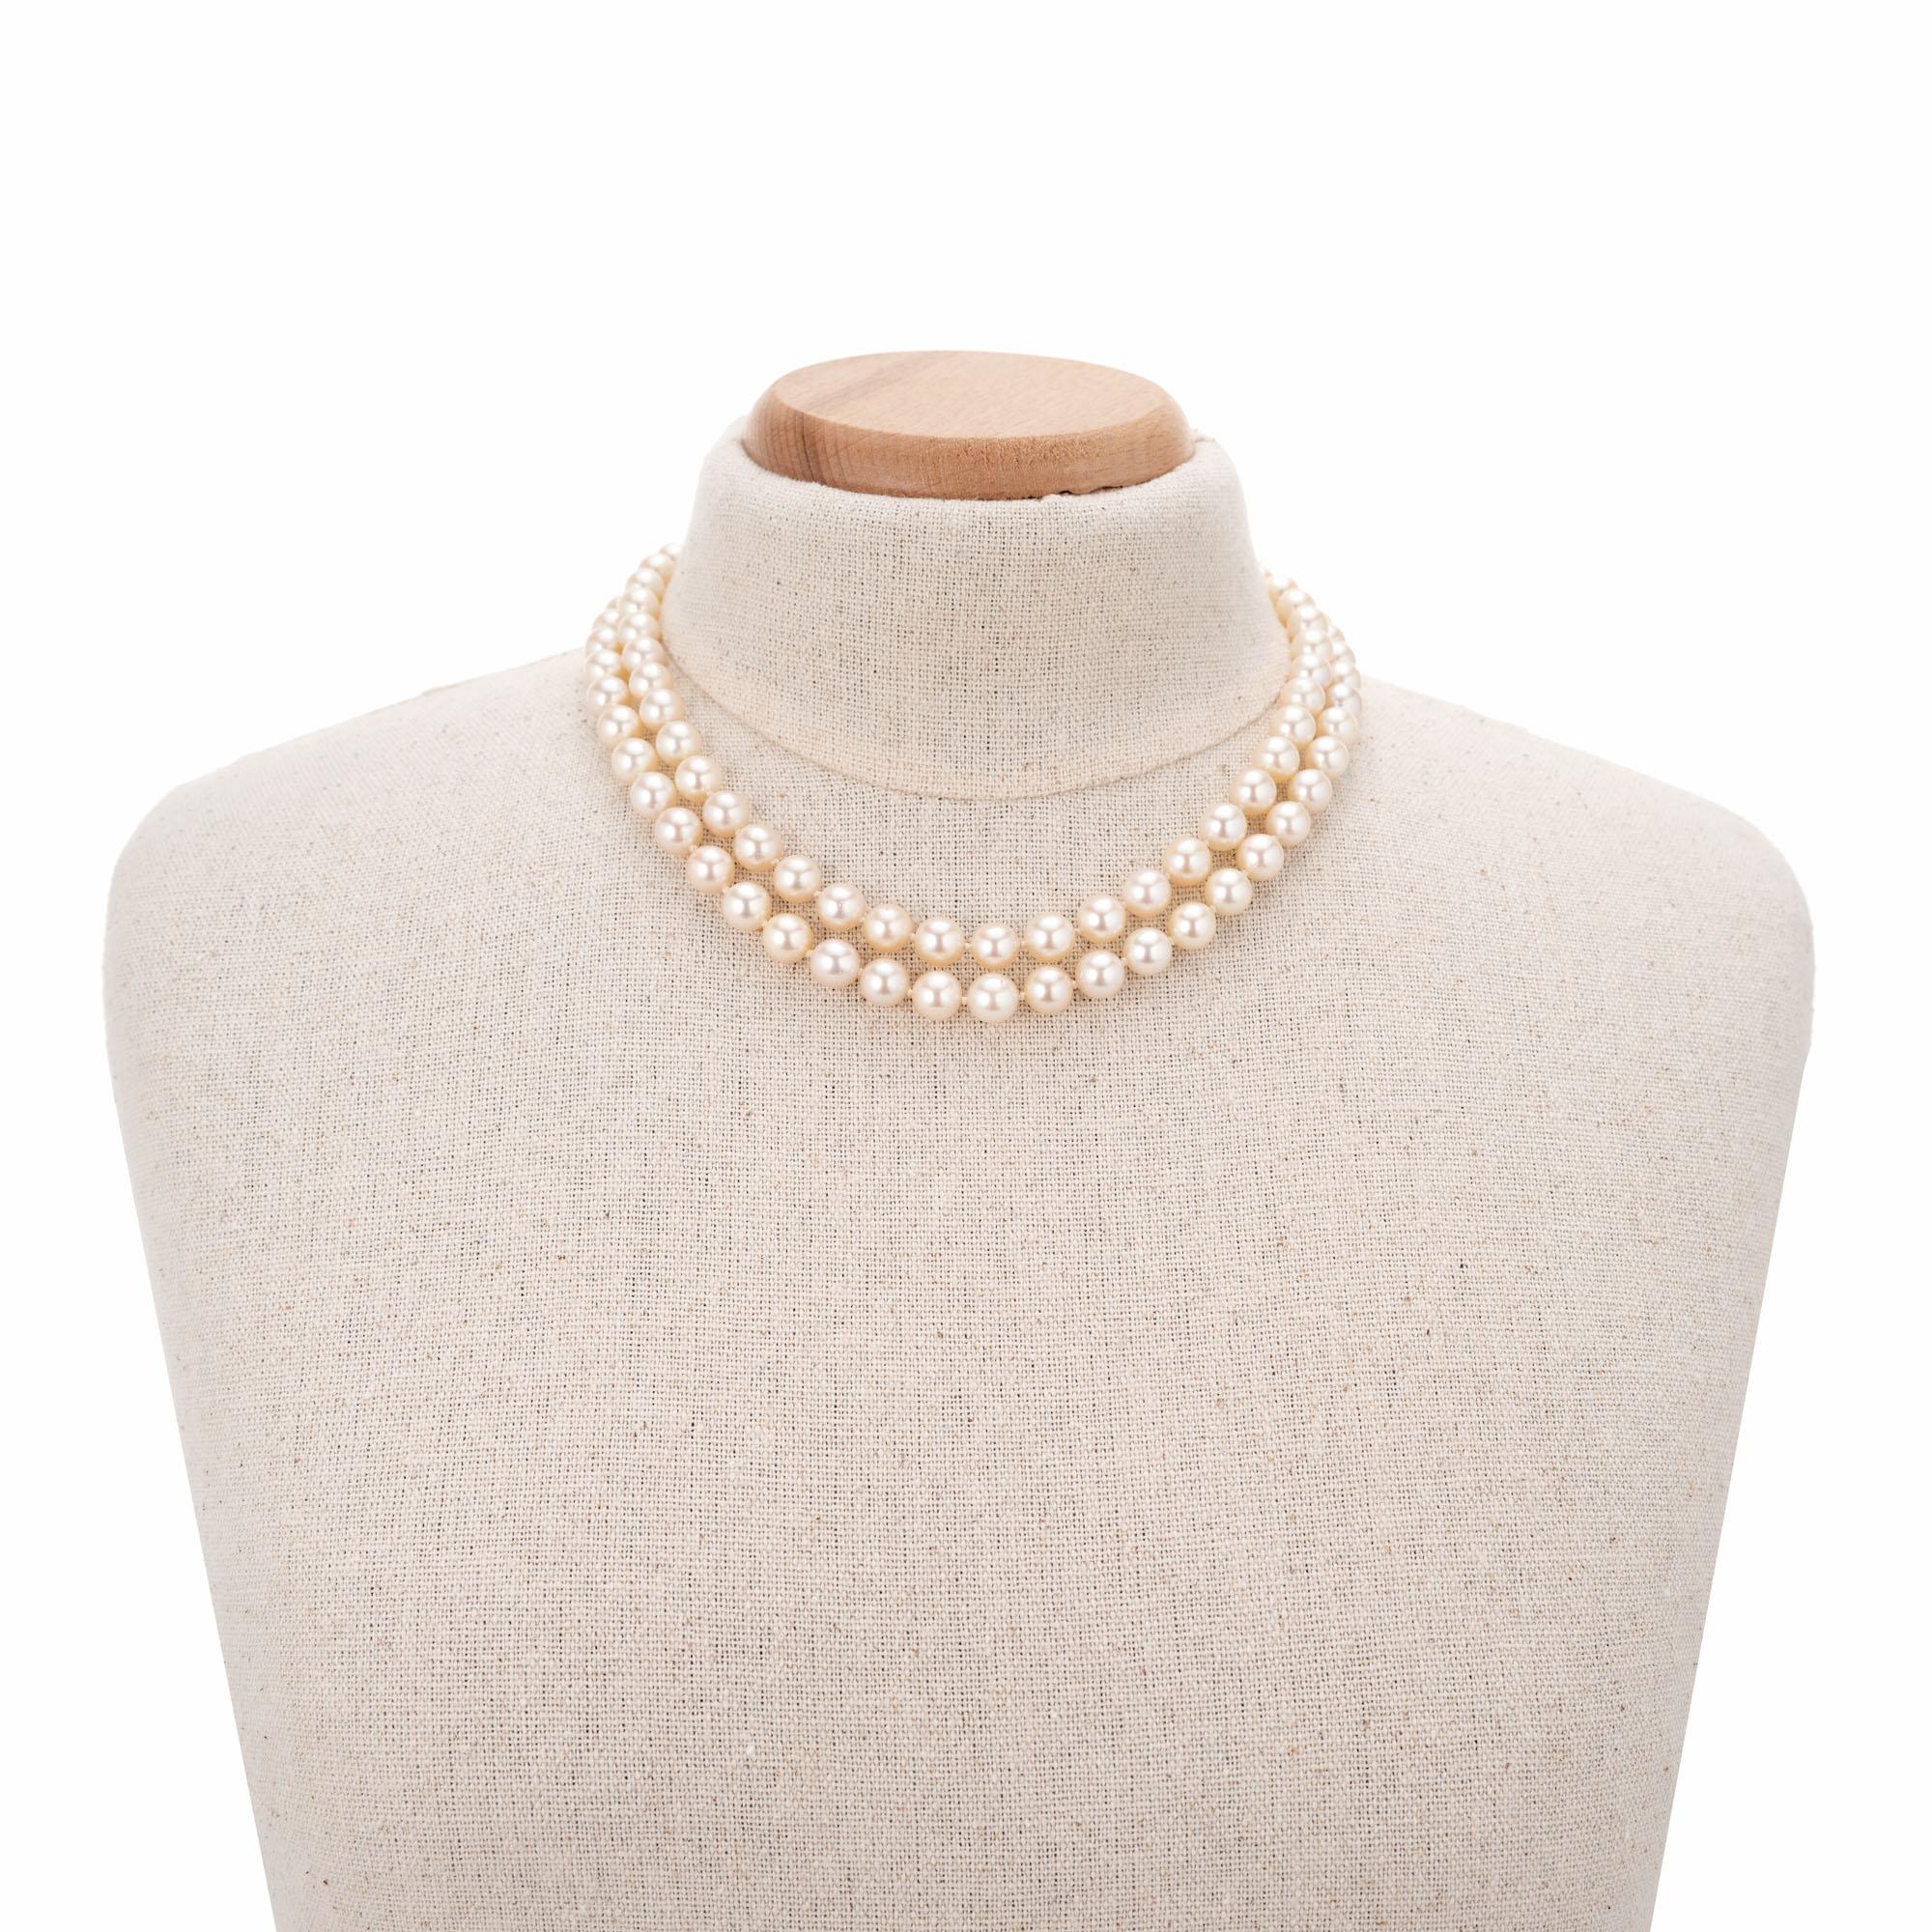 Japanese cultured pearl necklace with two strands that nestle just right on the neck with one at 16 and the other at 18 inches. 14k gold custom clasp. 

90 natural white with pink overtone Akoya pearls, 8mm, excellent lustre, few blemishes, Mikimoto